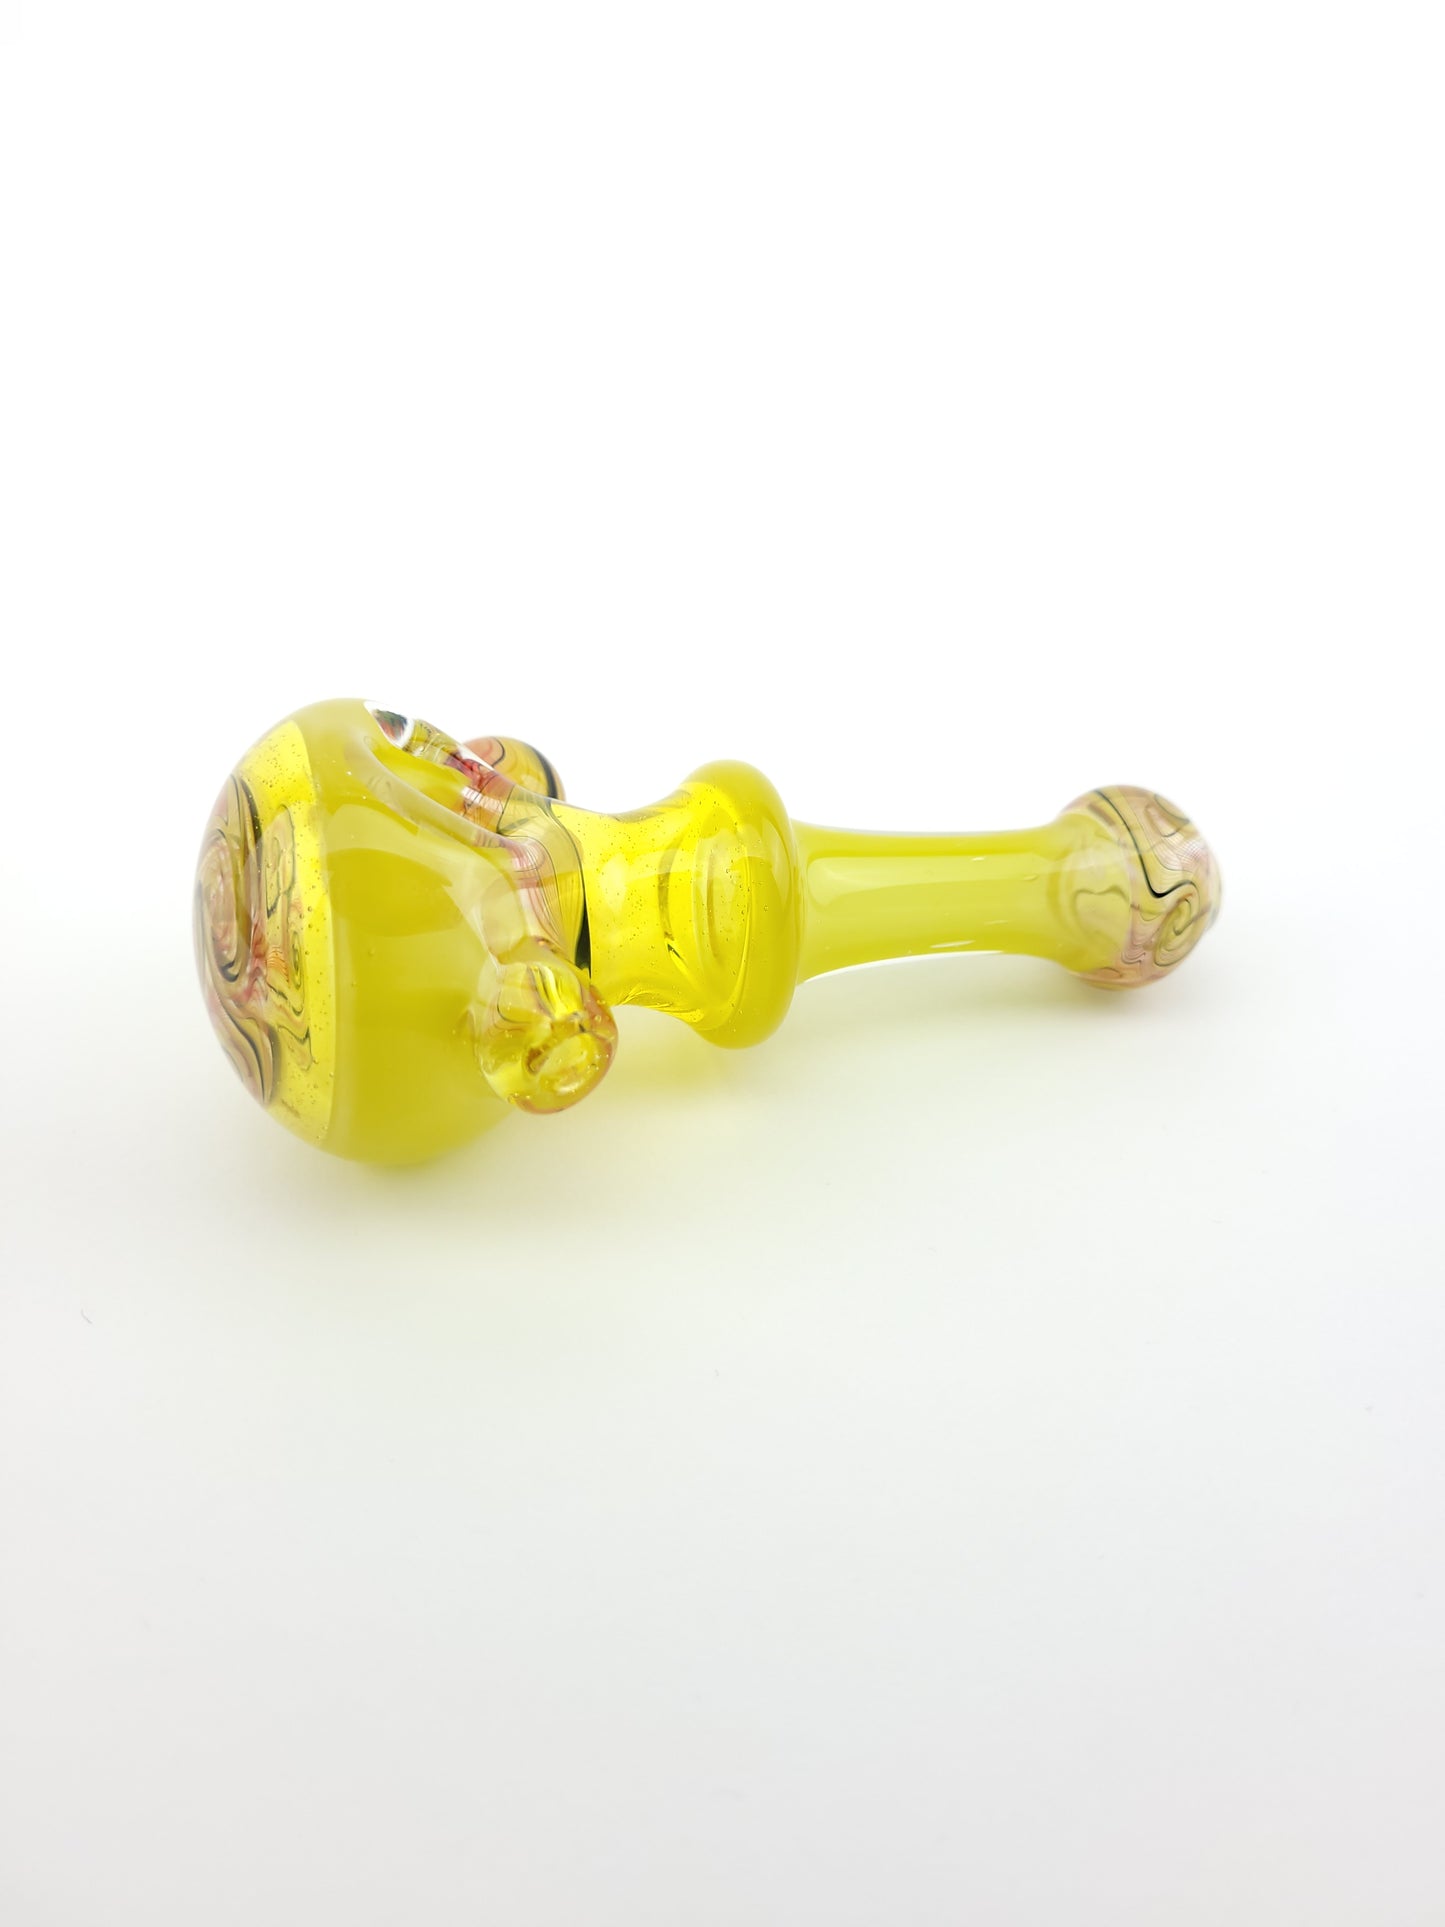 Cowboy Glass Yellow Spoon Hand Pipe